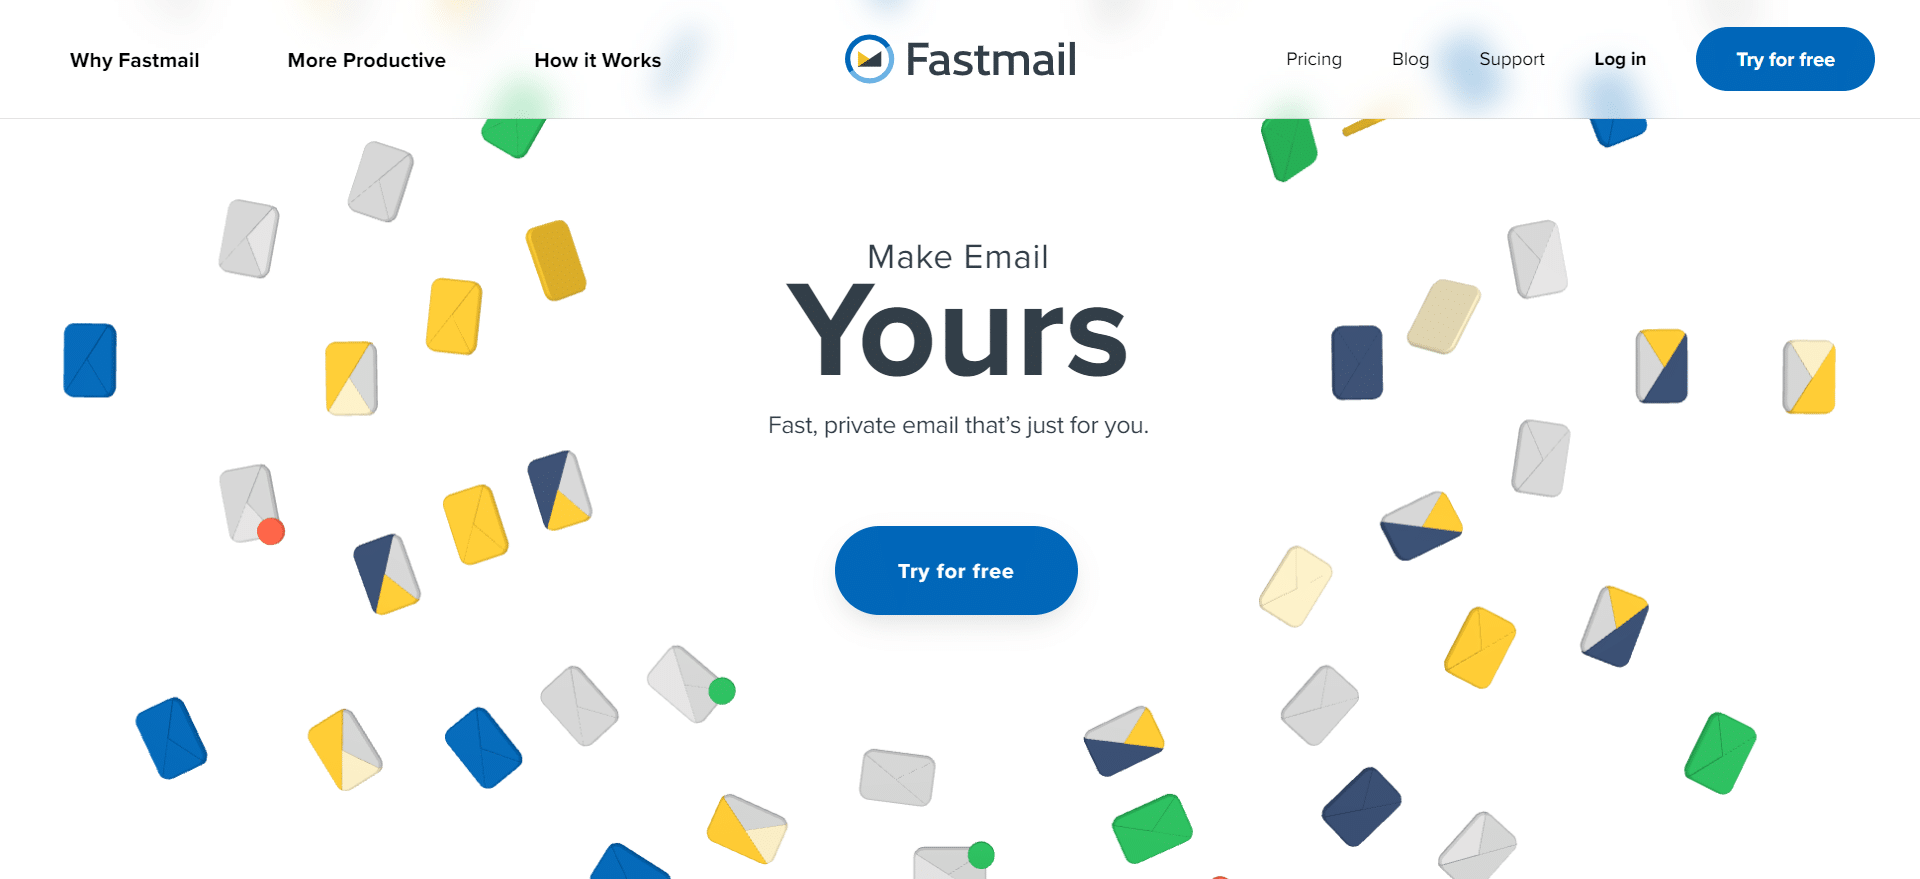 FastMail